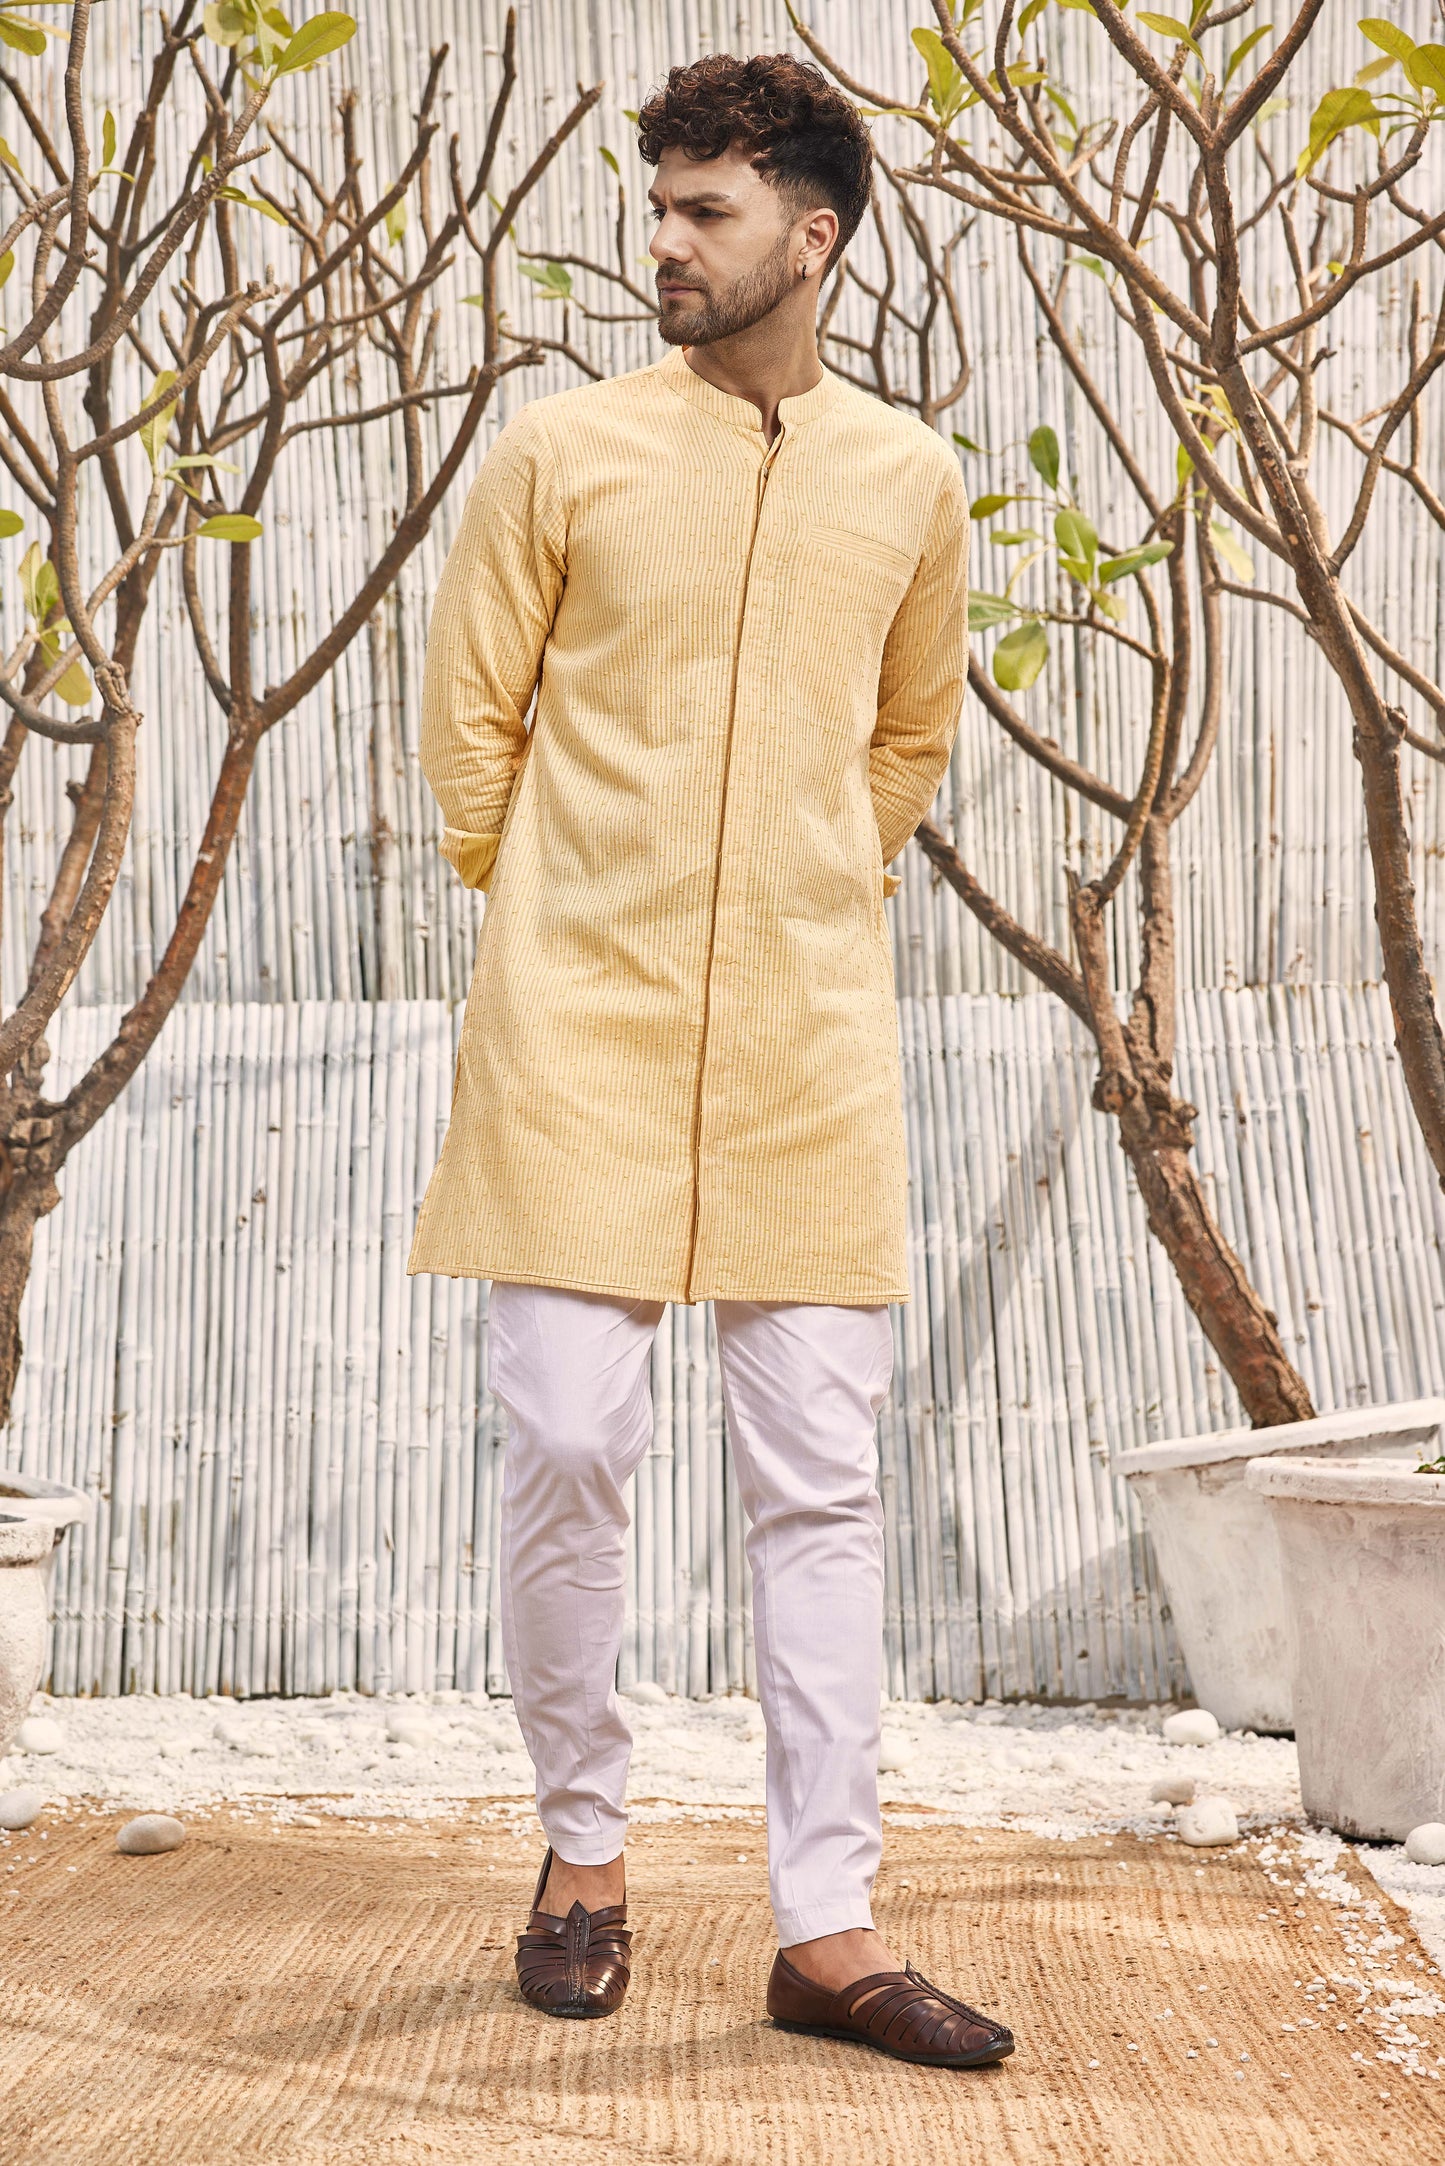 Cotton Placket Kurta - Yellow at Kamakhyaa by Charkhee. This item is Cotton, Dobby Cotton, Festive Wear, For Him, Kurtas, Menswear, Natural, Regular Fit, Shores 23, Textured, Tops, Wedding Gifts, Yellow